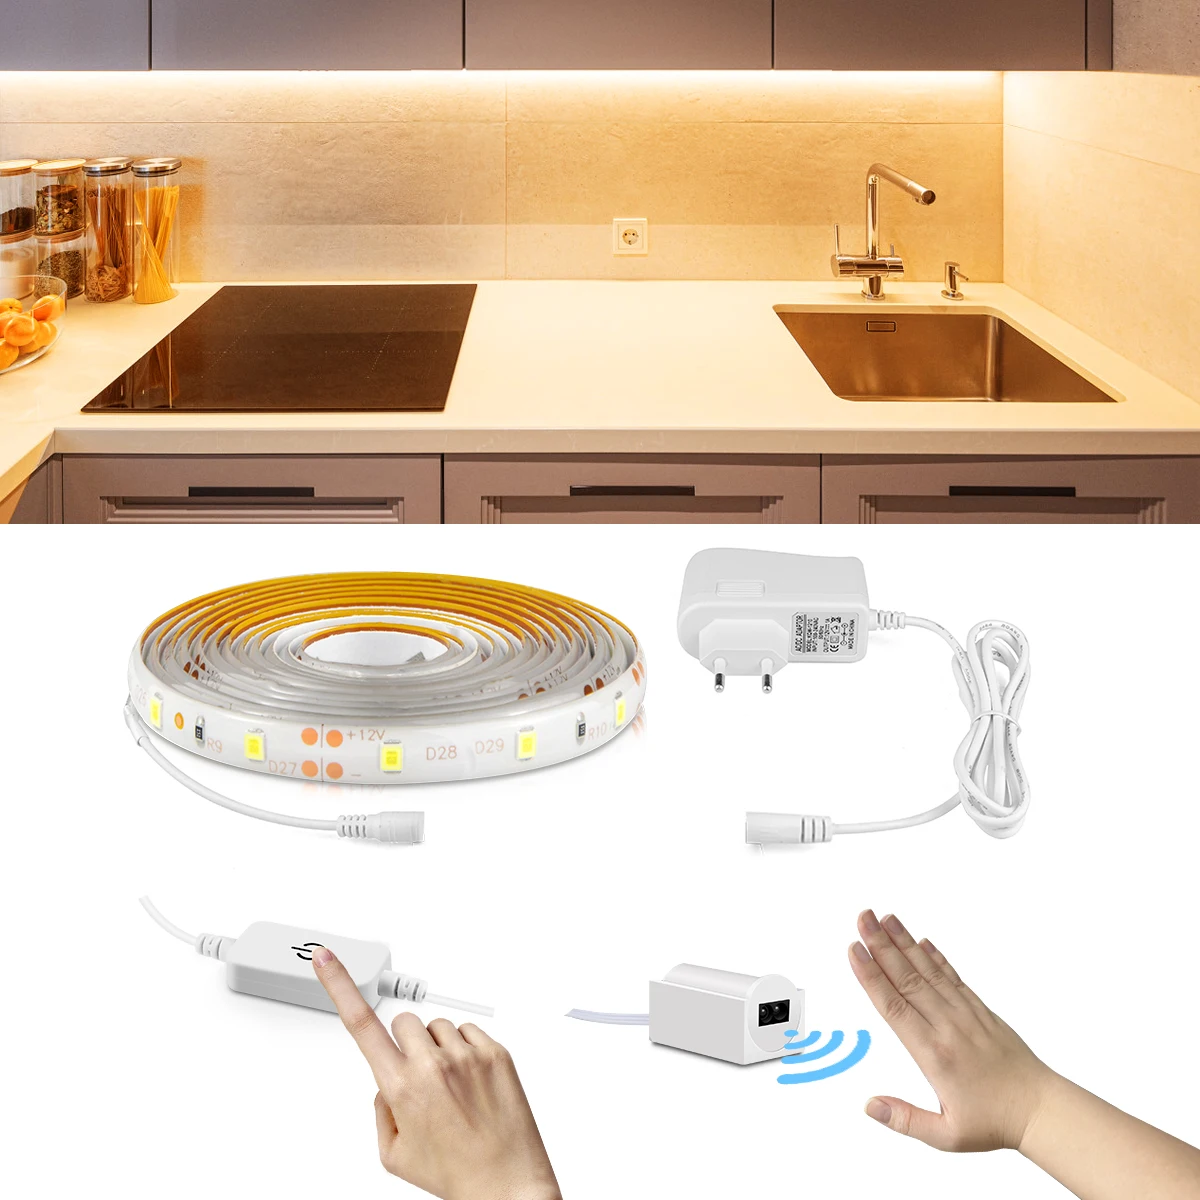 Kitchen LED Strip Light Touch Dimmer / Hand Sweep Motion Sensor Control Waterproof Under Cabinet Light Luces Led Ribbons Tape